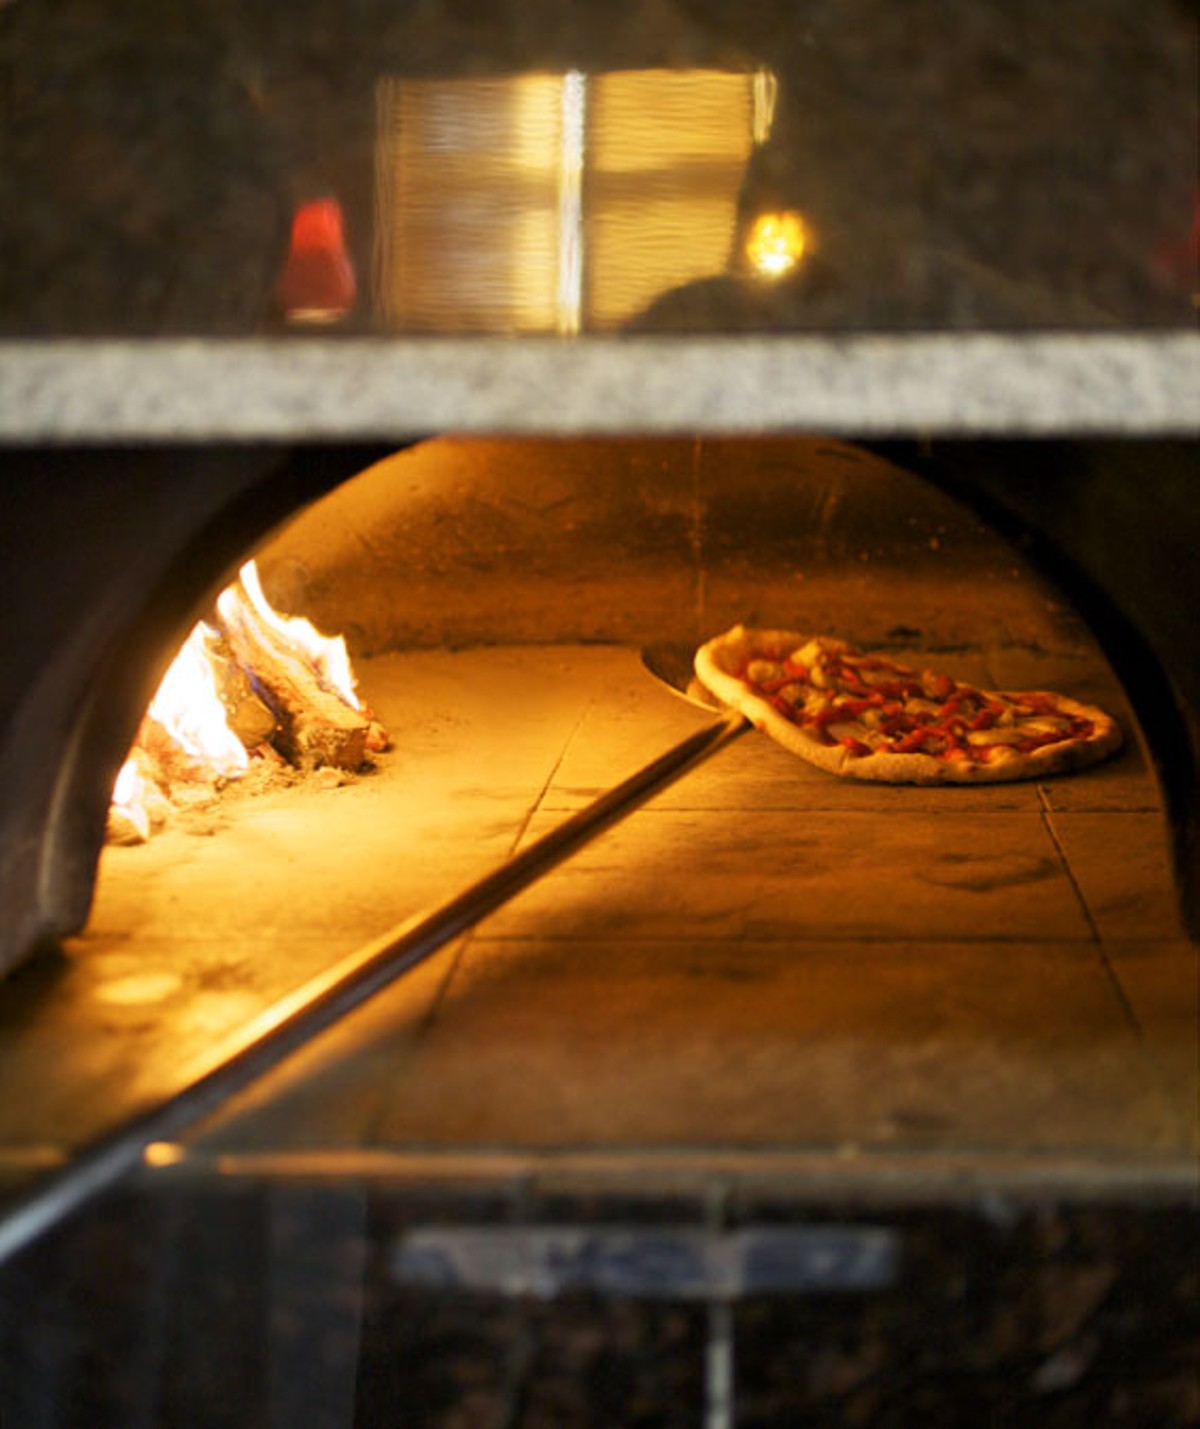 Slice Is Nice: With its brick oven, Pizzeria Tivoli is a welcome addition to Princeton Heights